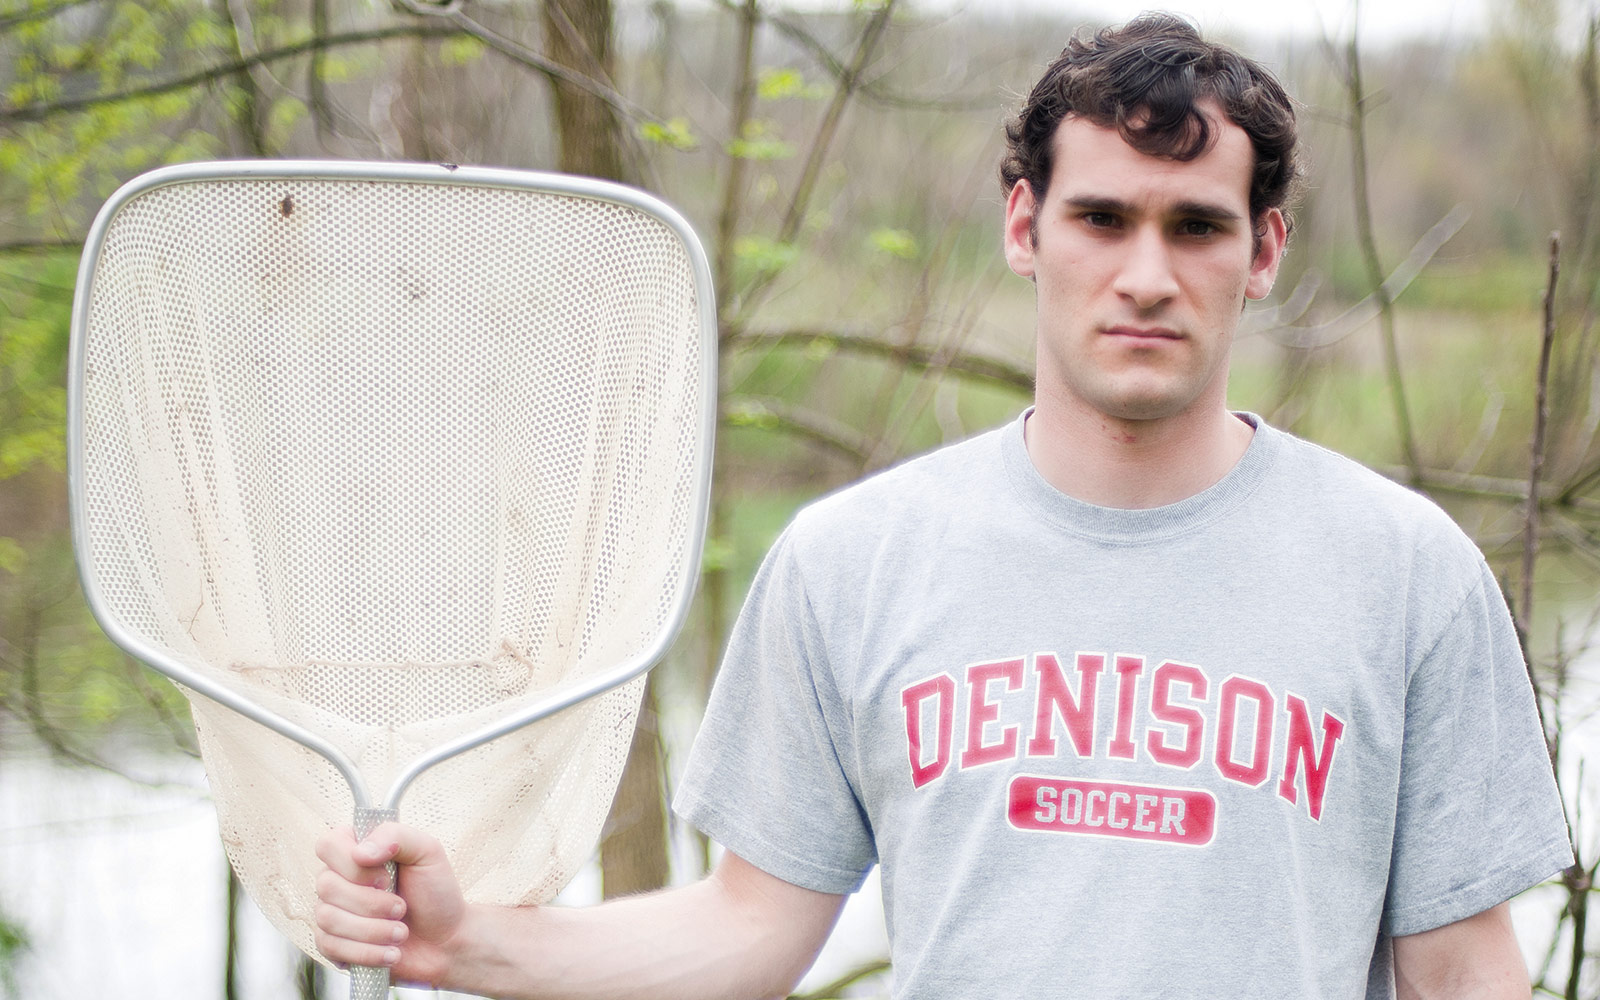 In this photo, I was going for that 'American Gothic' look. He really wanted to smile the whole time. I just liked the fishing net, the water behind him, the Denison soccer shirt. For me it kind of incorporates everything.